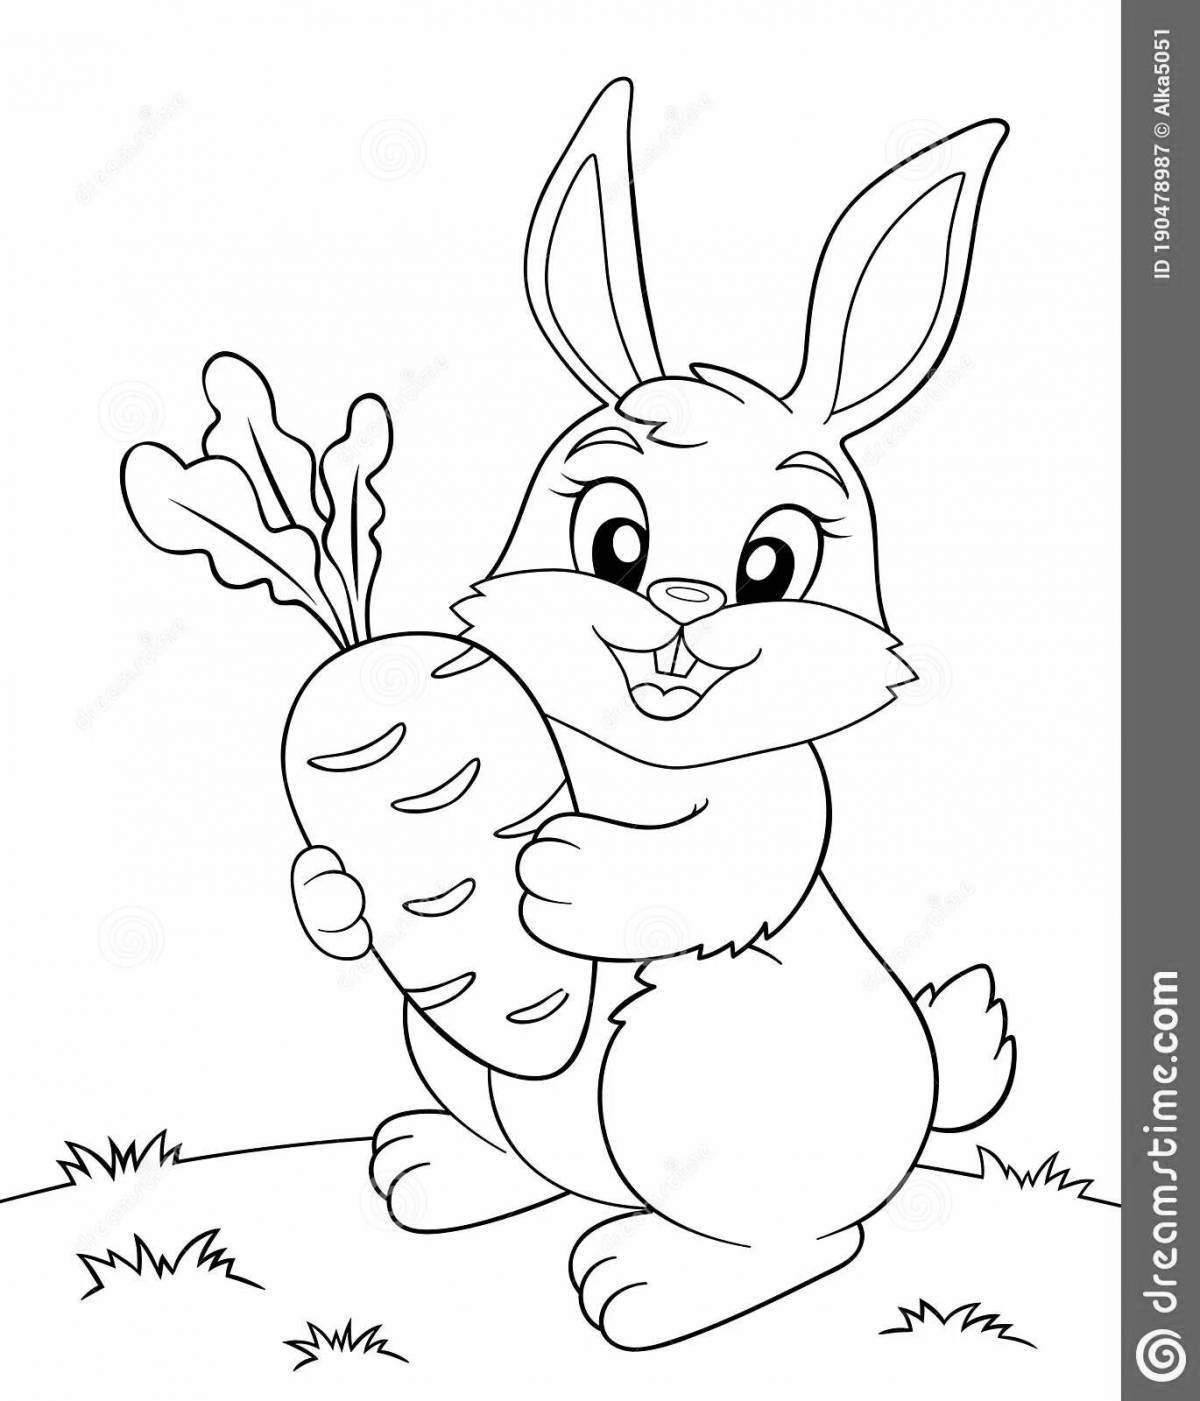 Crazy rabbit and carrot coloring book for kids